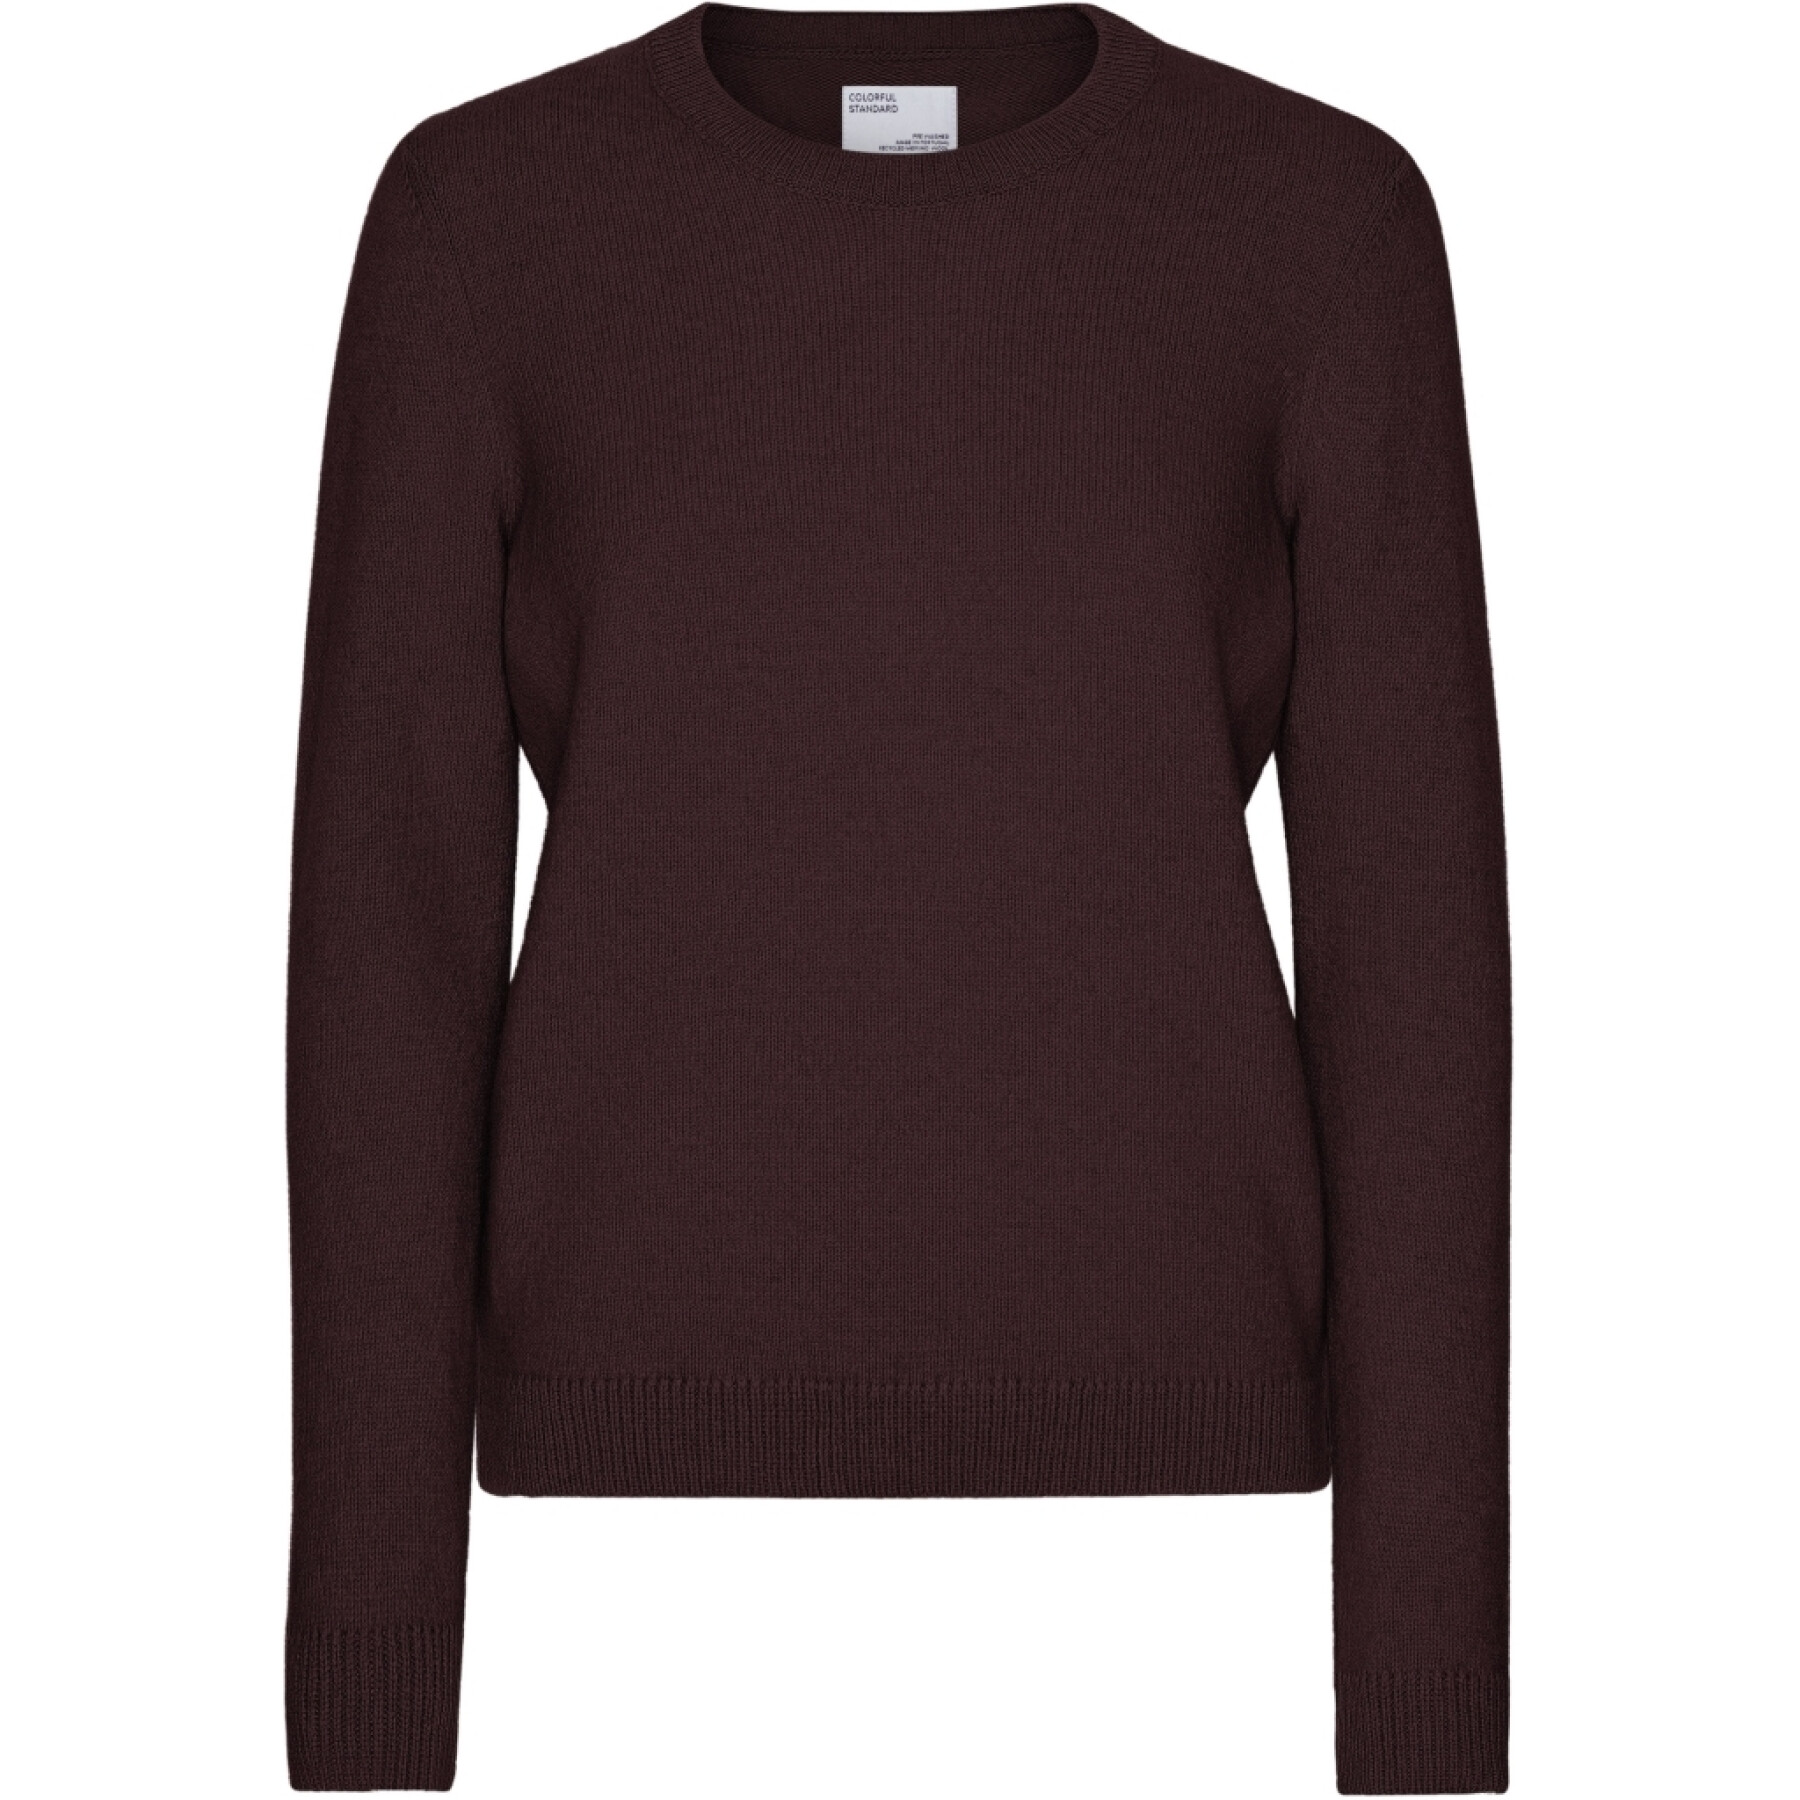 Woman sweater Colorful Standard Classic Oxblood Red